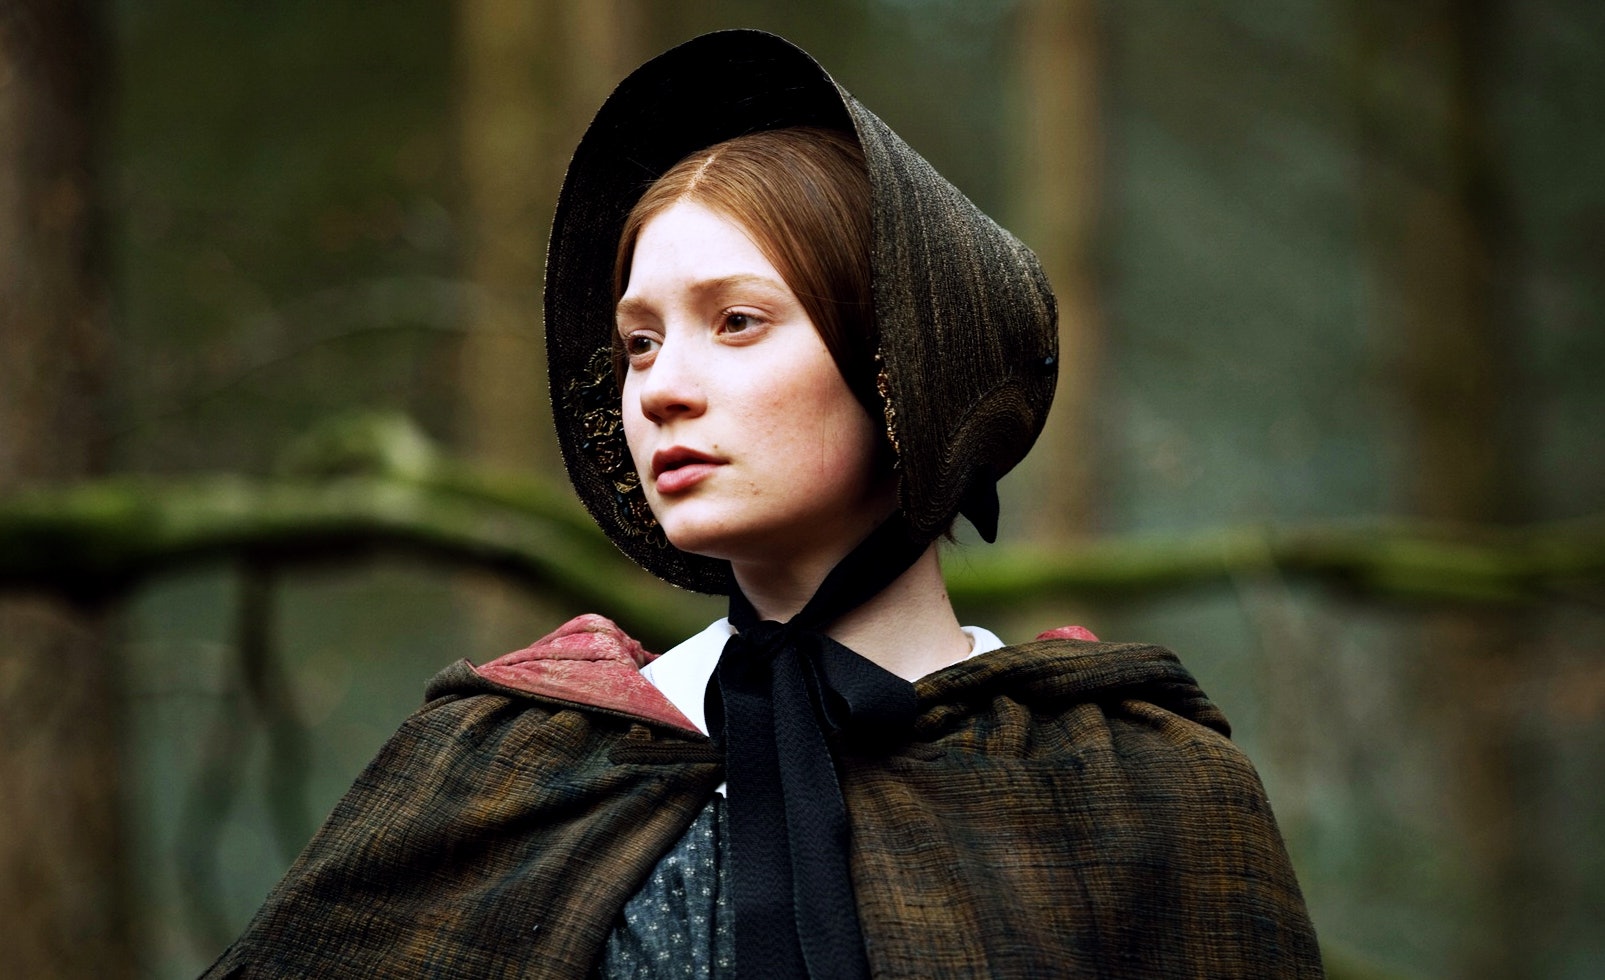 ENGLISH LITERATURE: JANE EYRE FROM A PSYCHOANALYTIC PERSPECTIVE